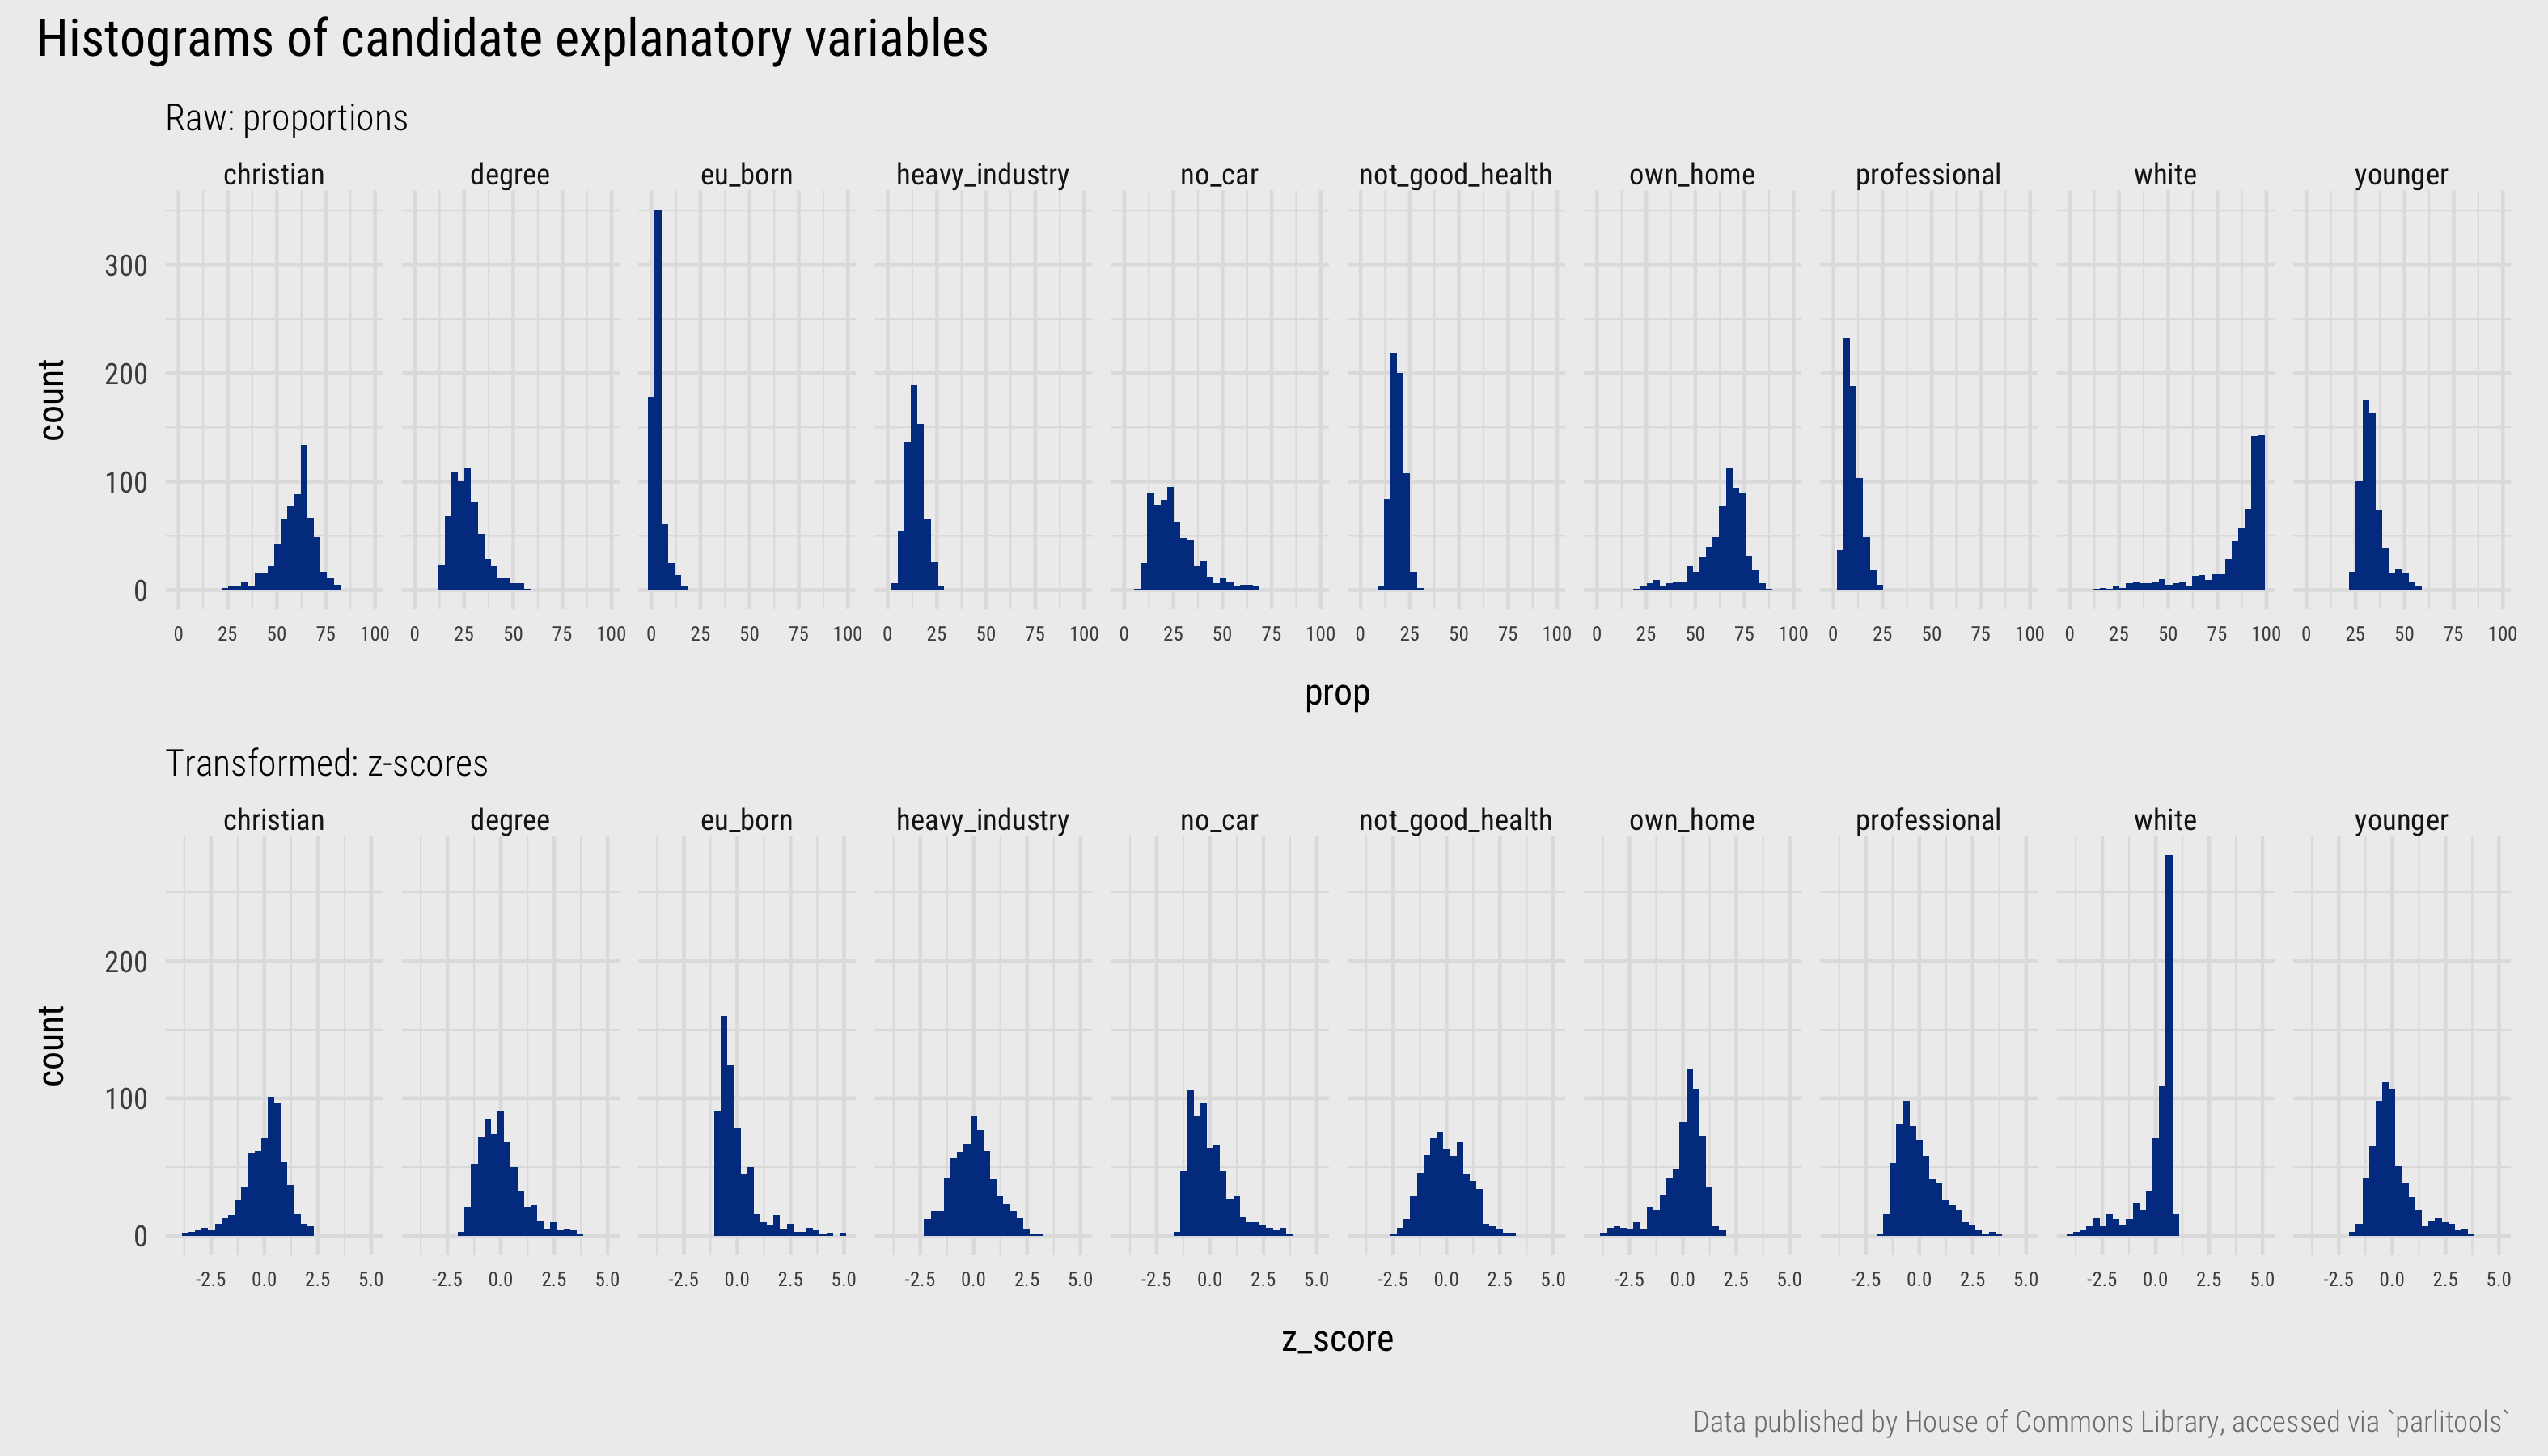 Histograms of candidate explanatory variables measuring demographic composition of constituencies.